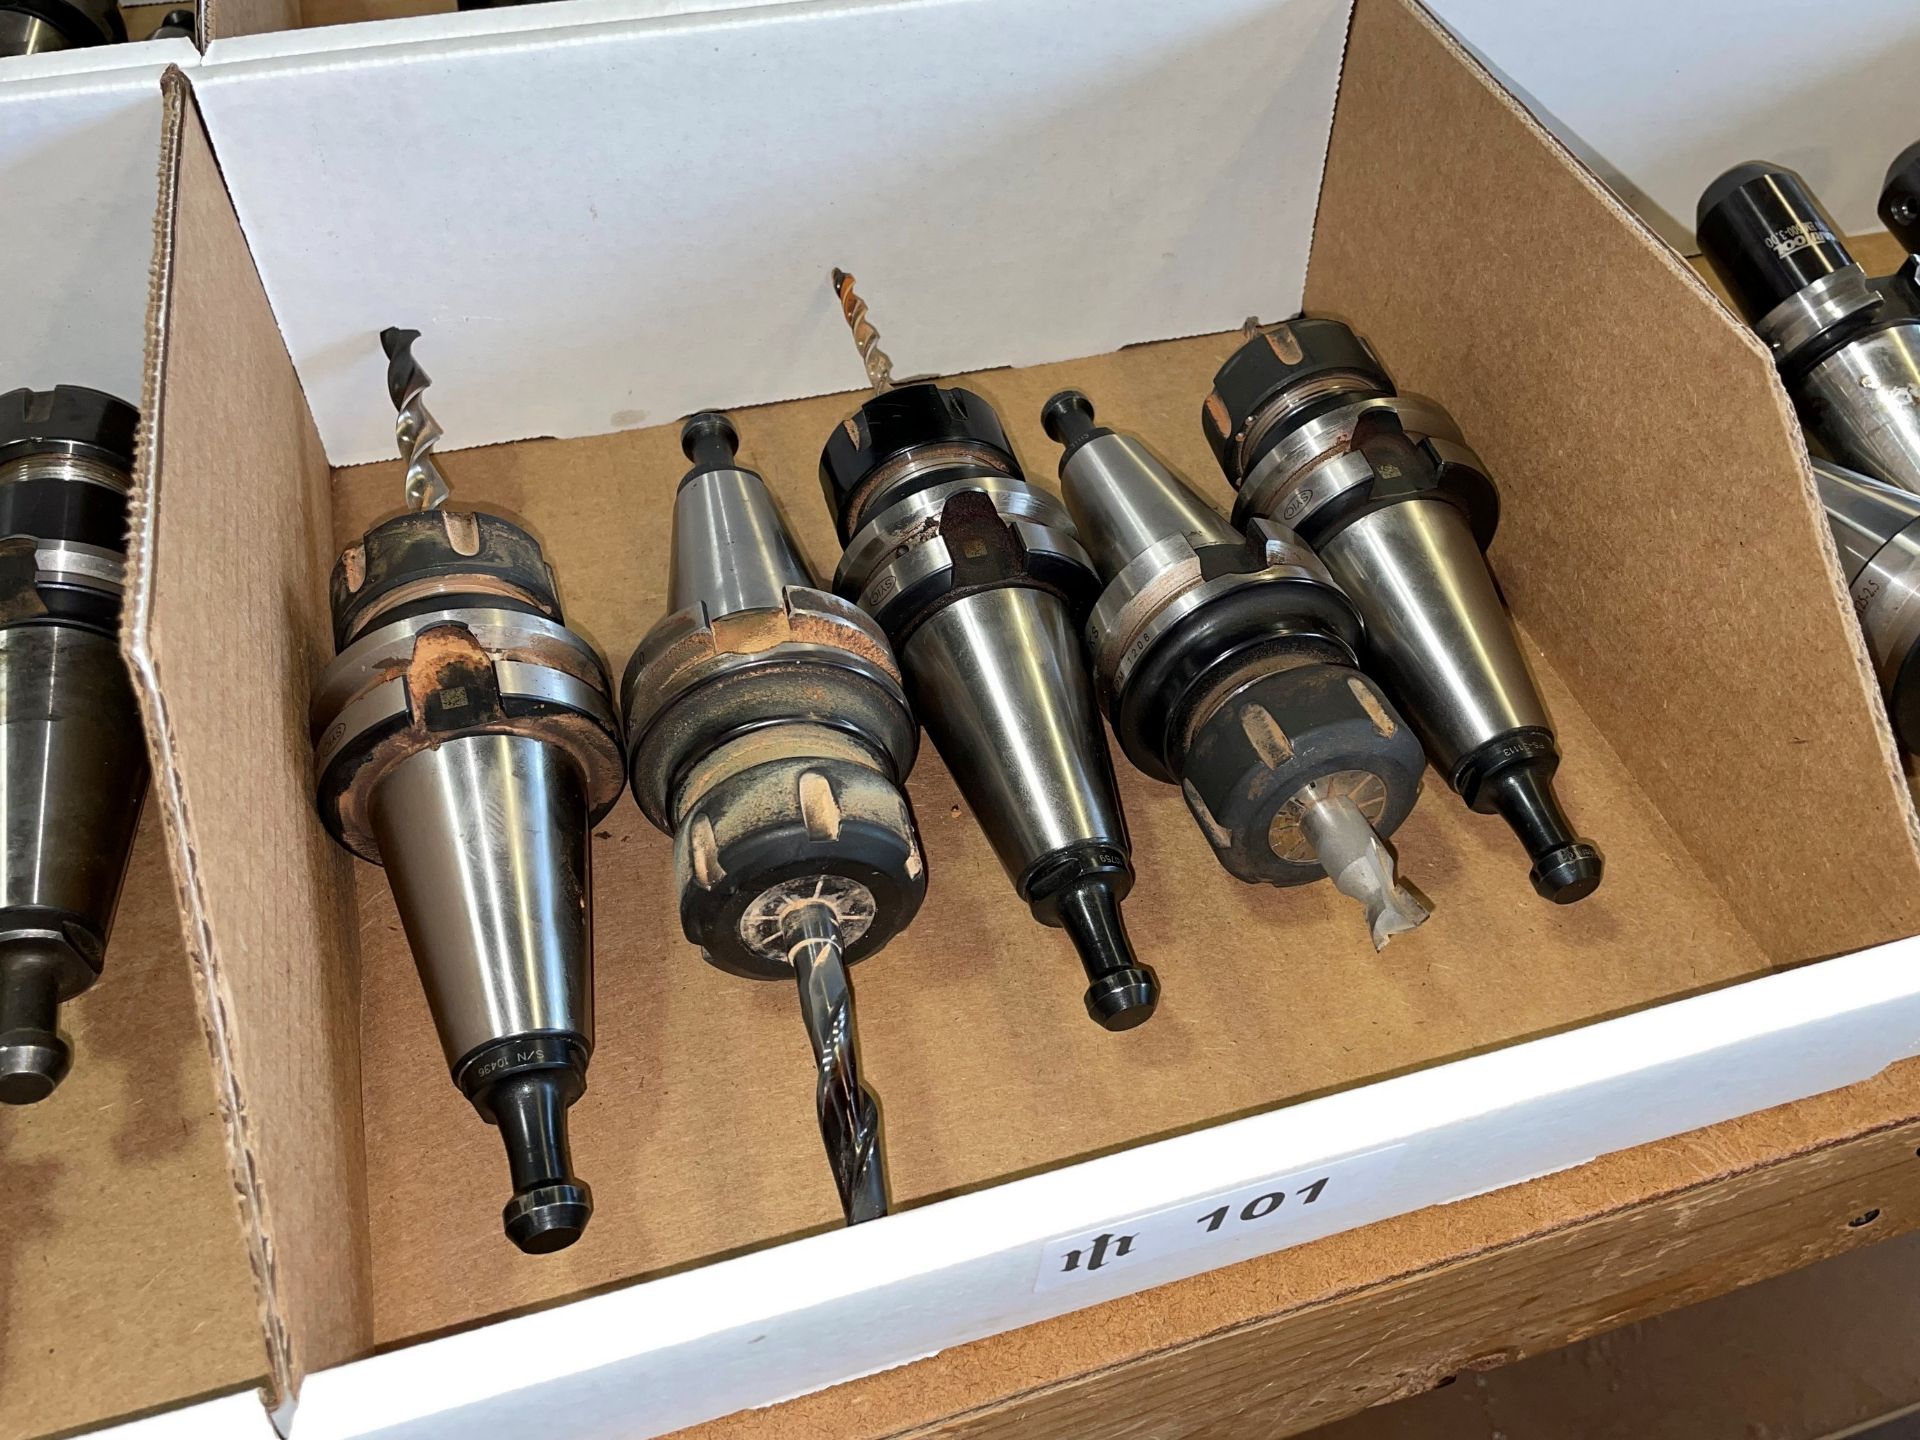 Lot with (5) CAT 40 Tool Holders